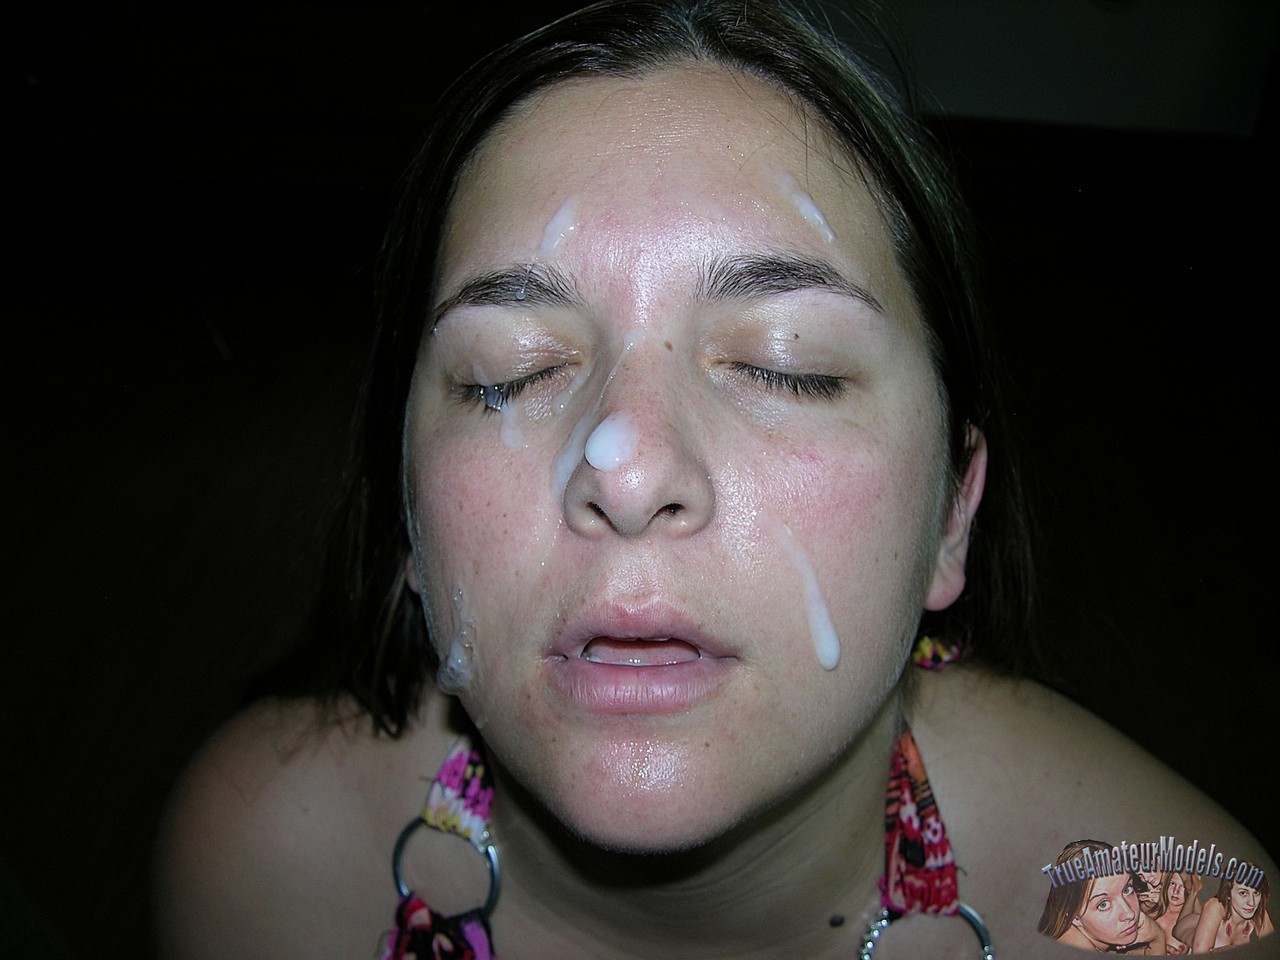 Chubby First Timer Receives A Cum Facial While Fully Clothed